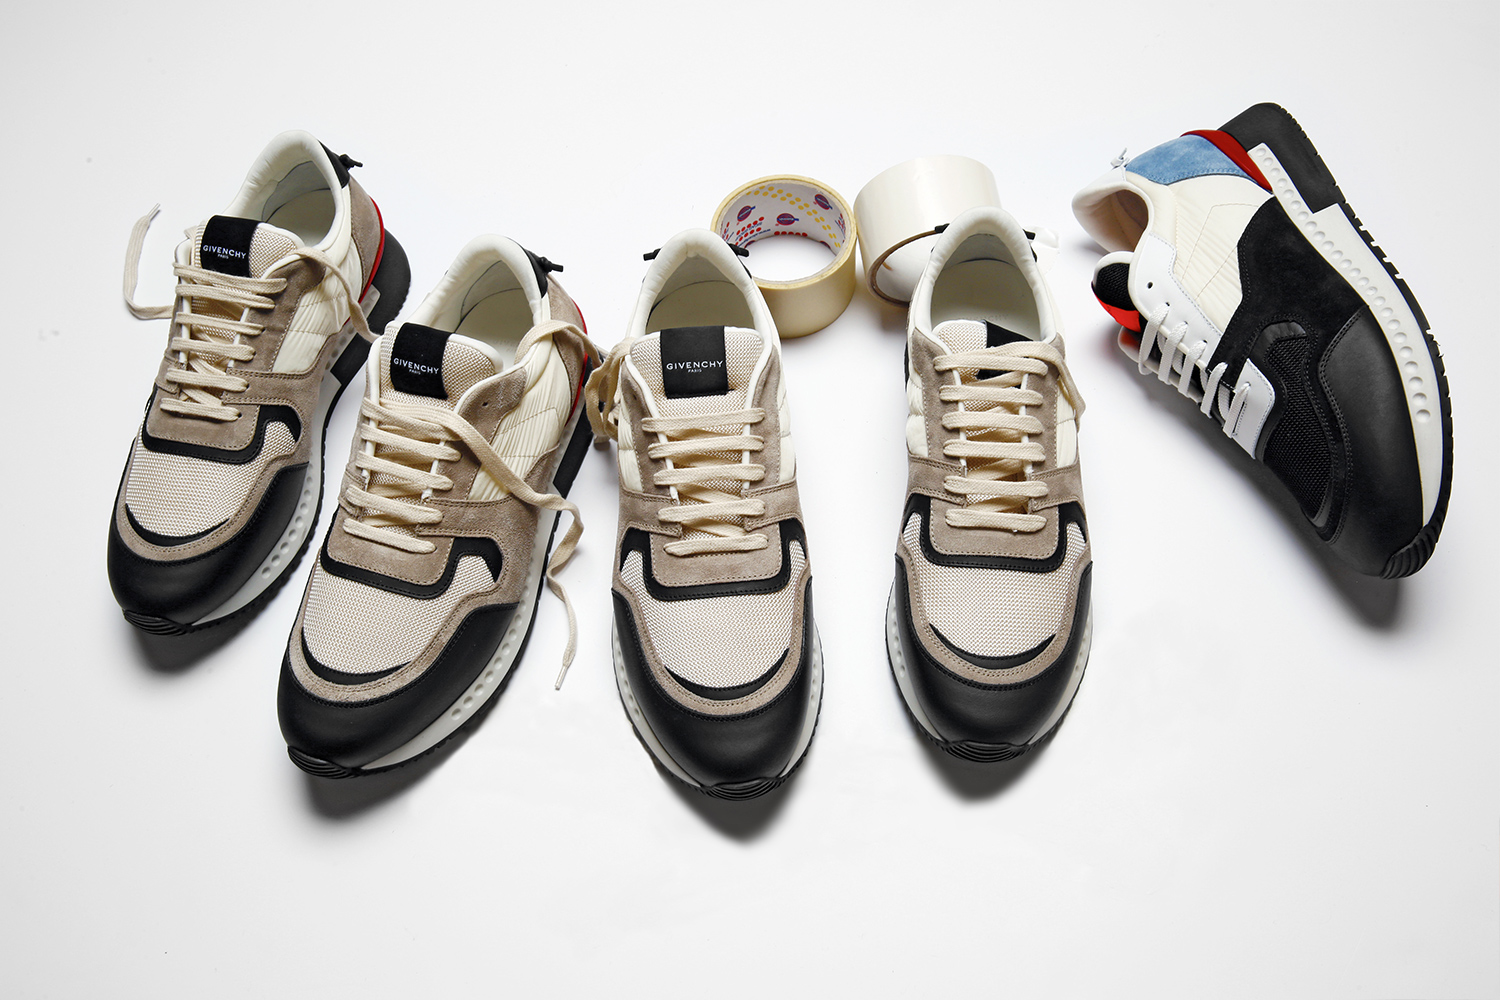 Givenchy Launches “Active Line” Running Sneakers